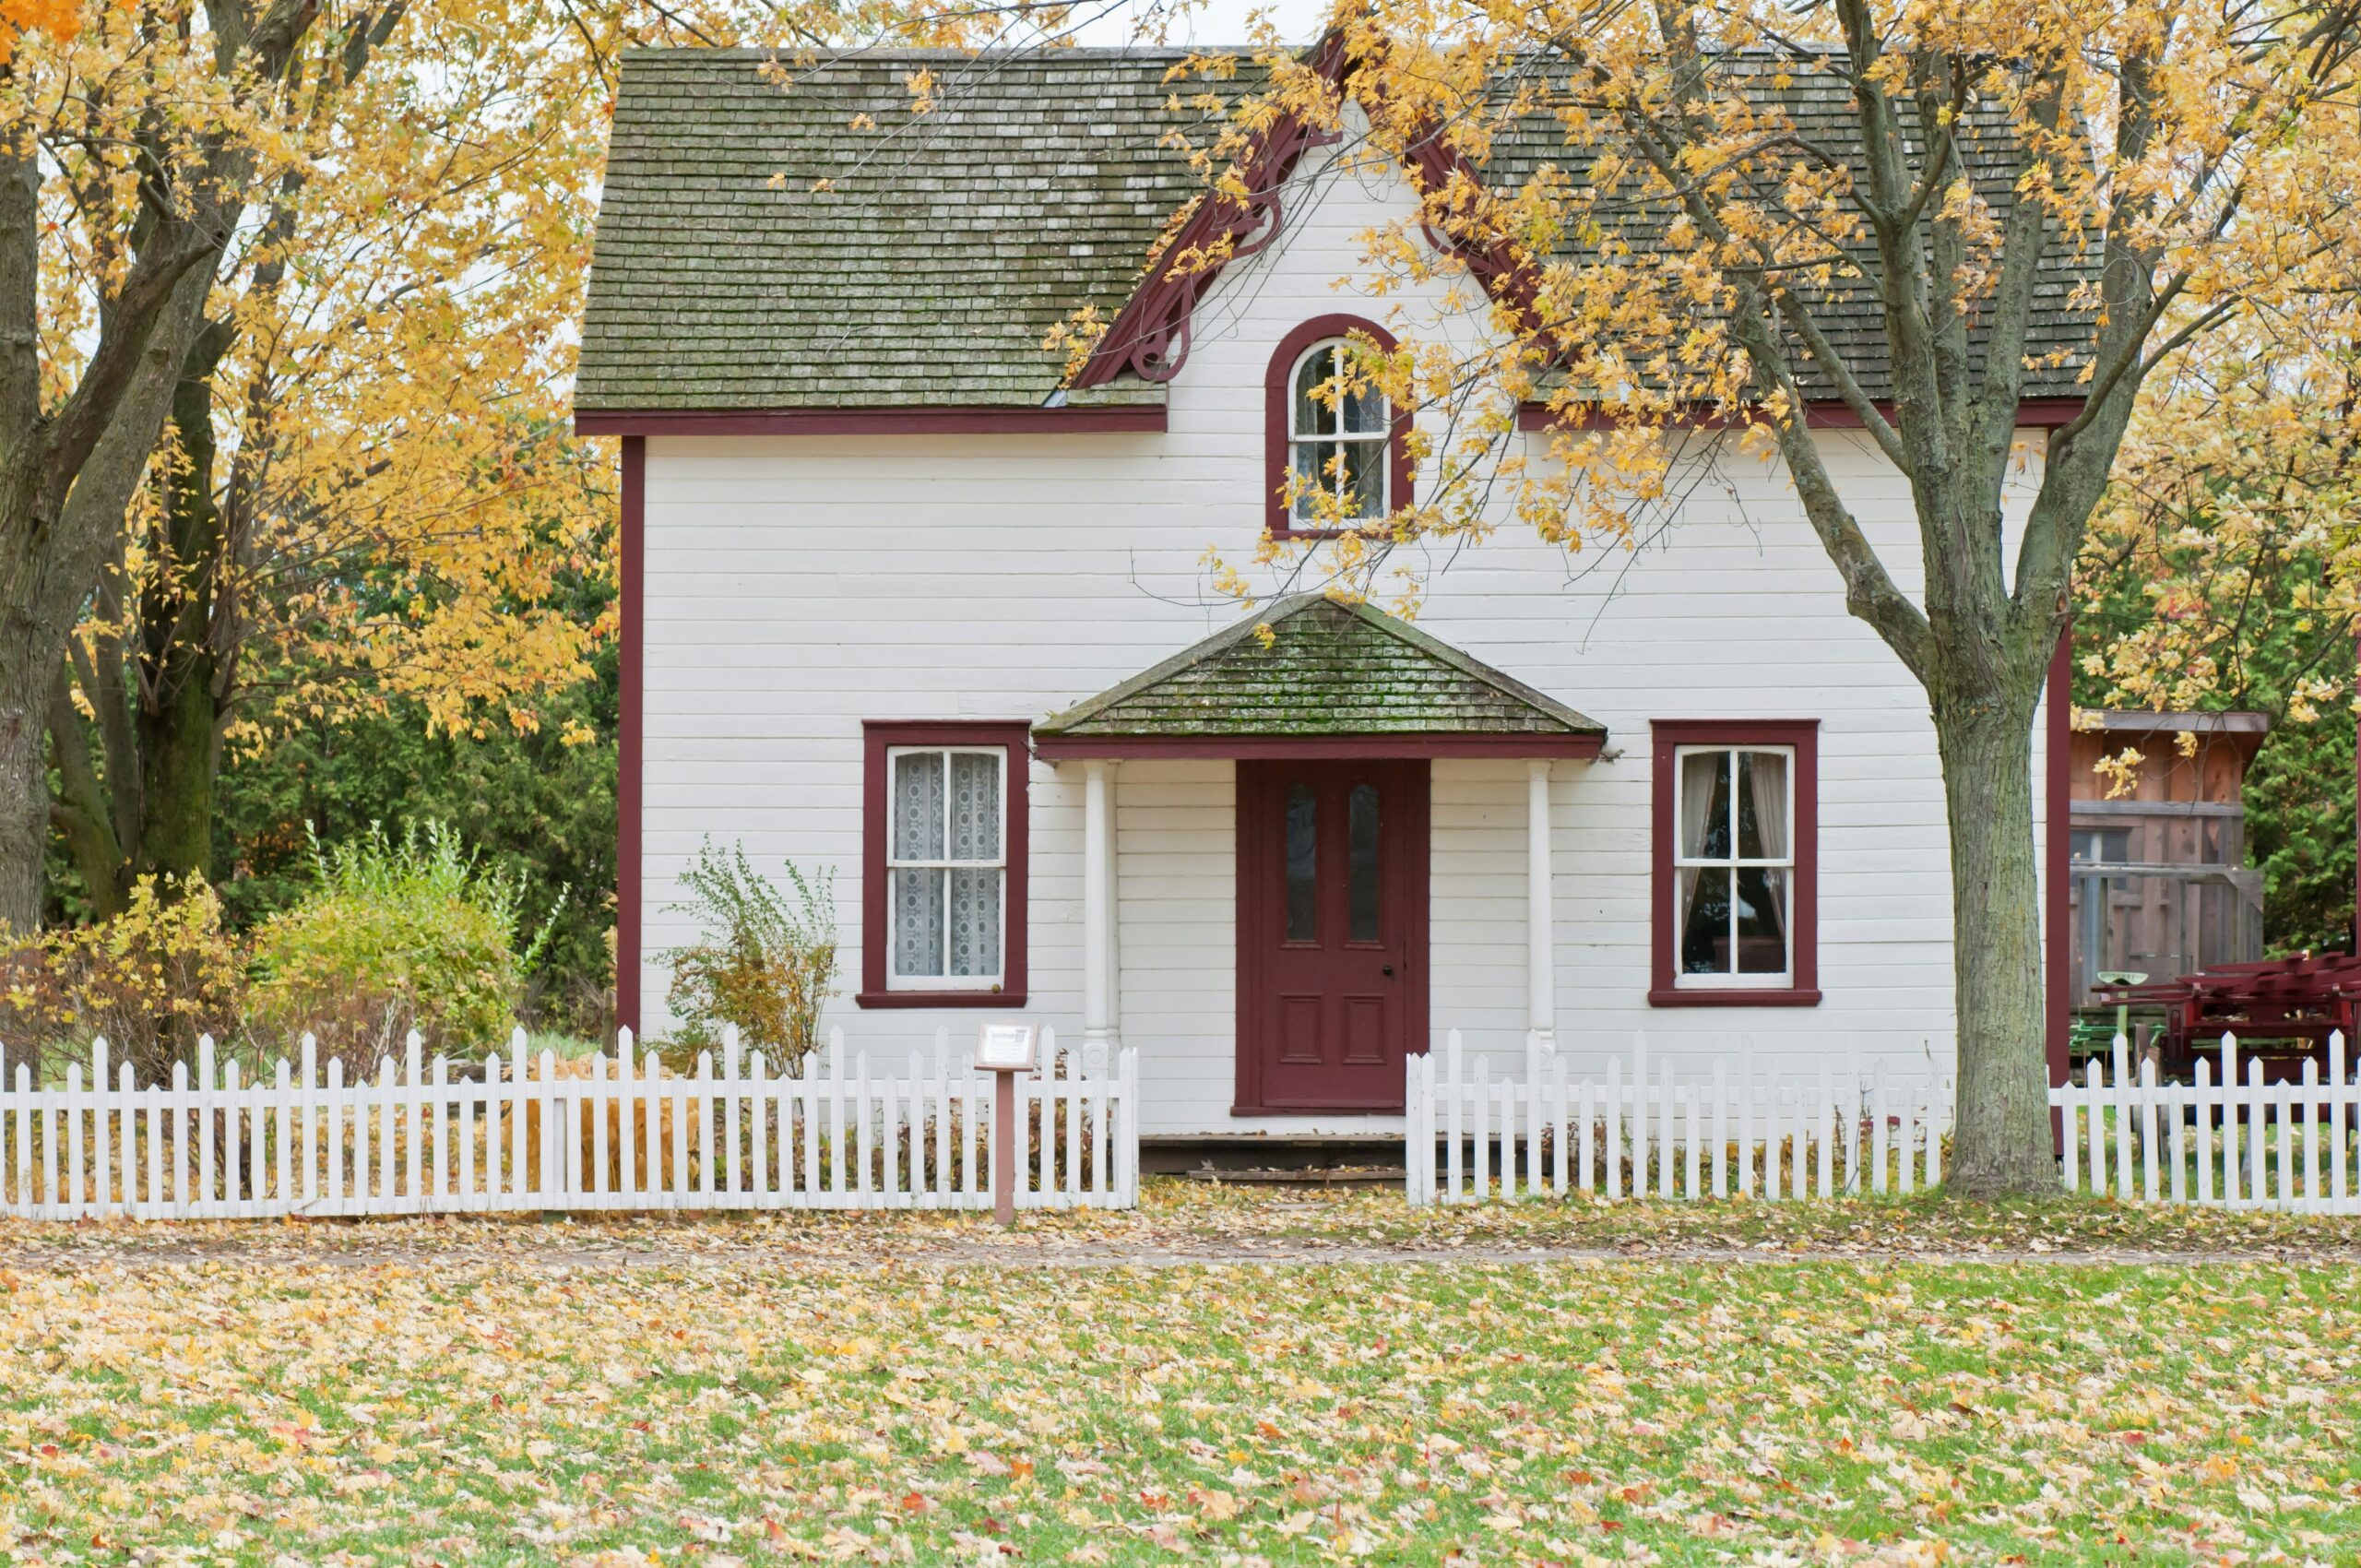 Small white house in front of a forest